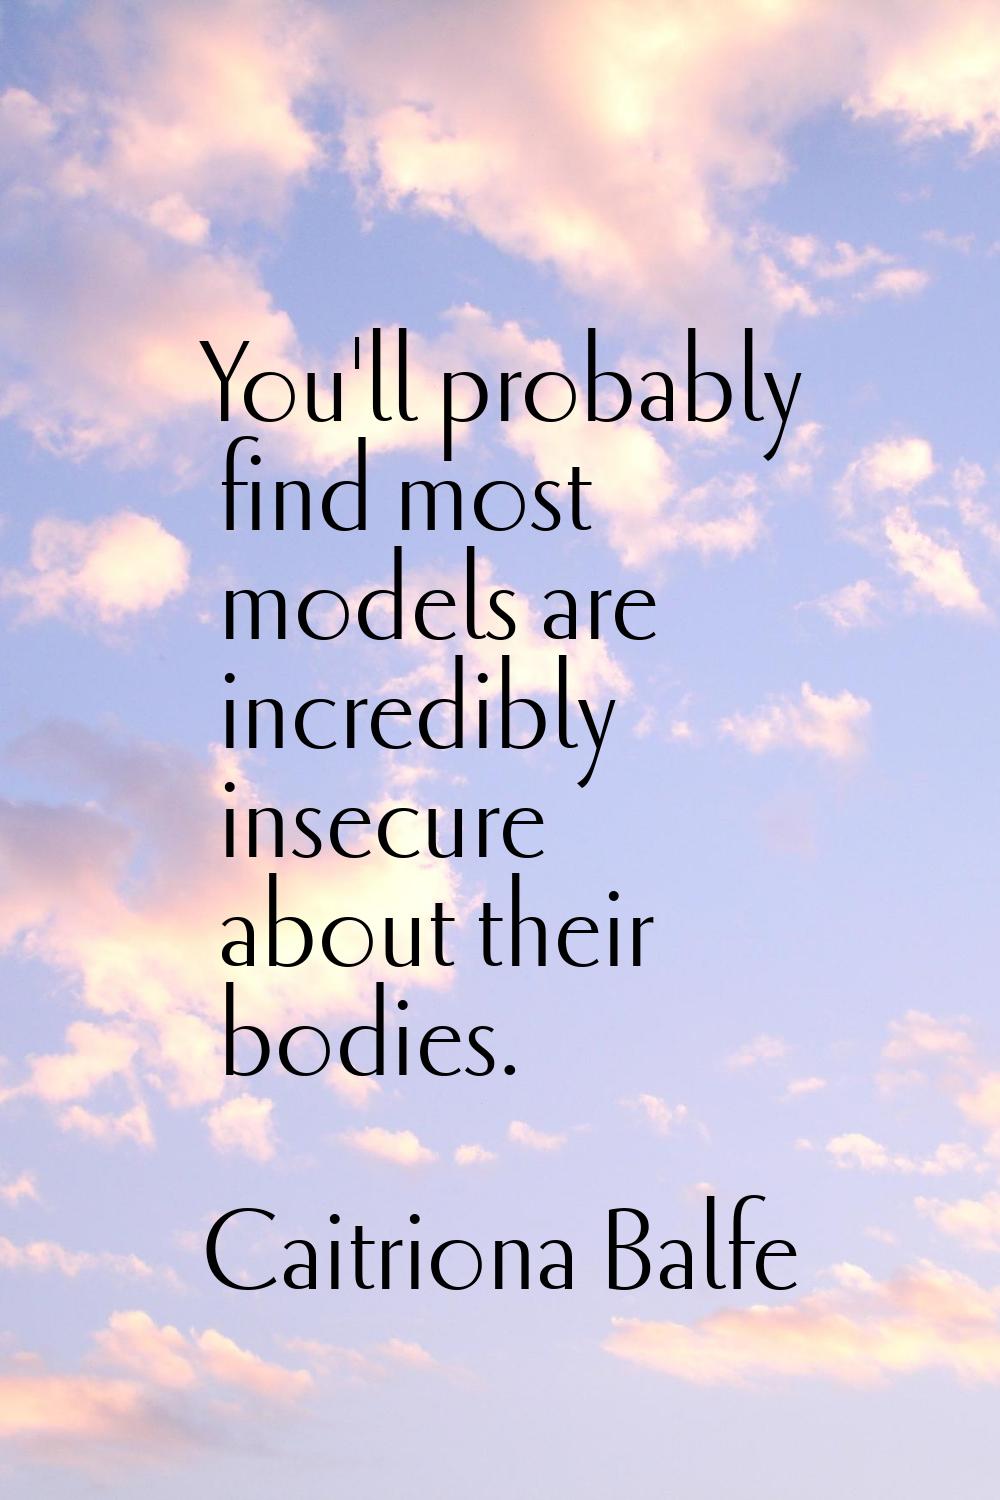 You'll probably find most models are incredibly insecure about their bodies.